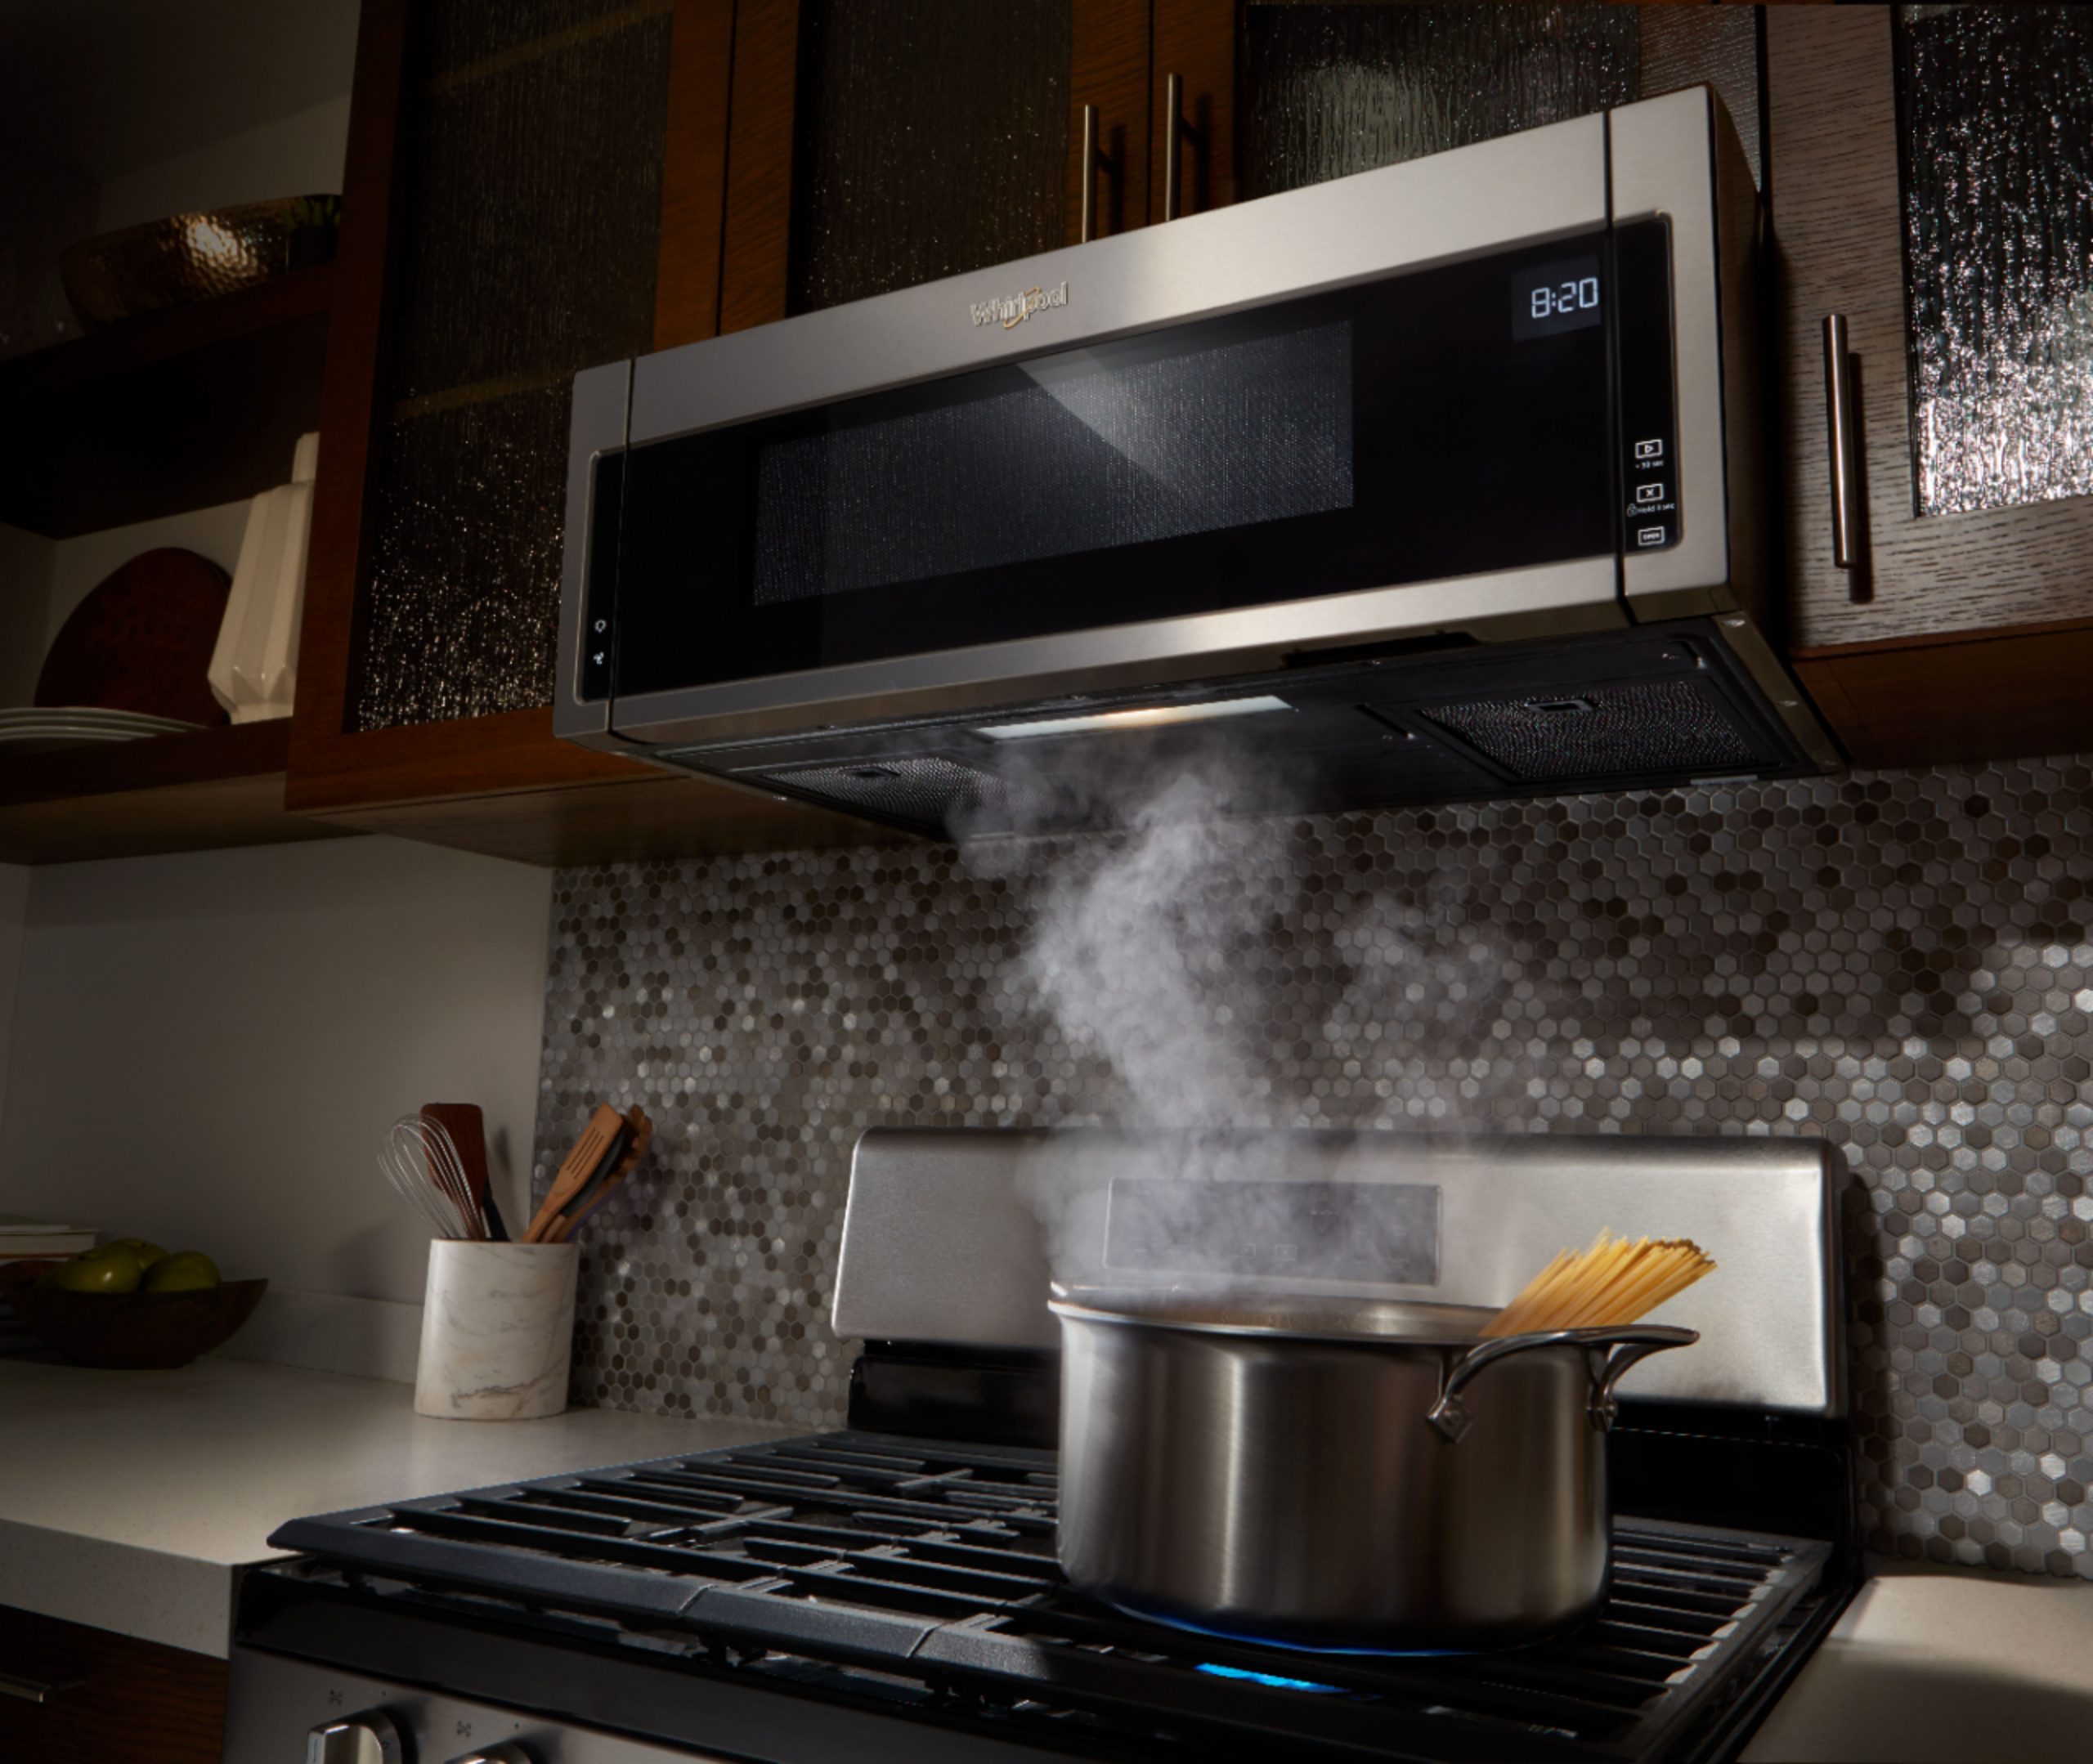 Whirlpool 11 Cu Ft Low Profile Over The Range Microwave Hood Combination Stainless Steel throughout sizing 6868 X 5789